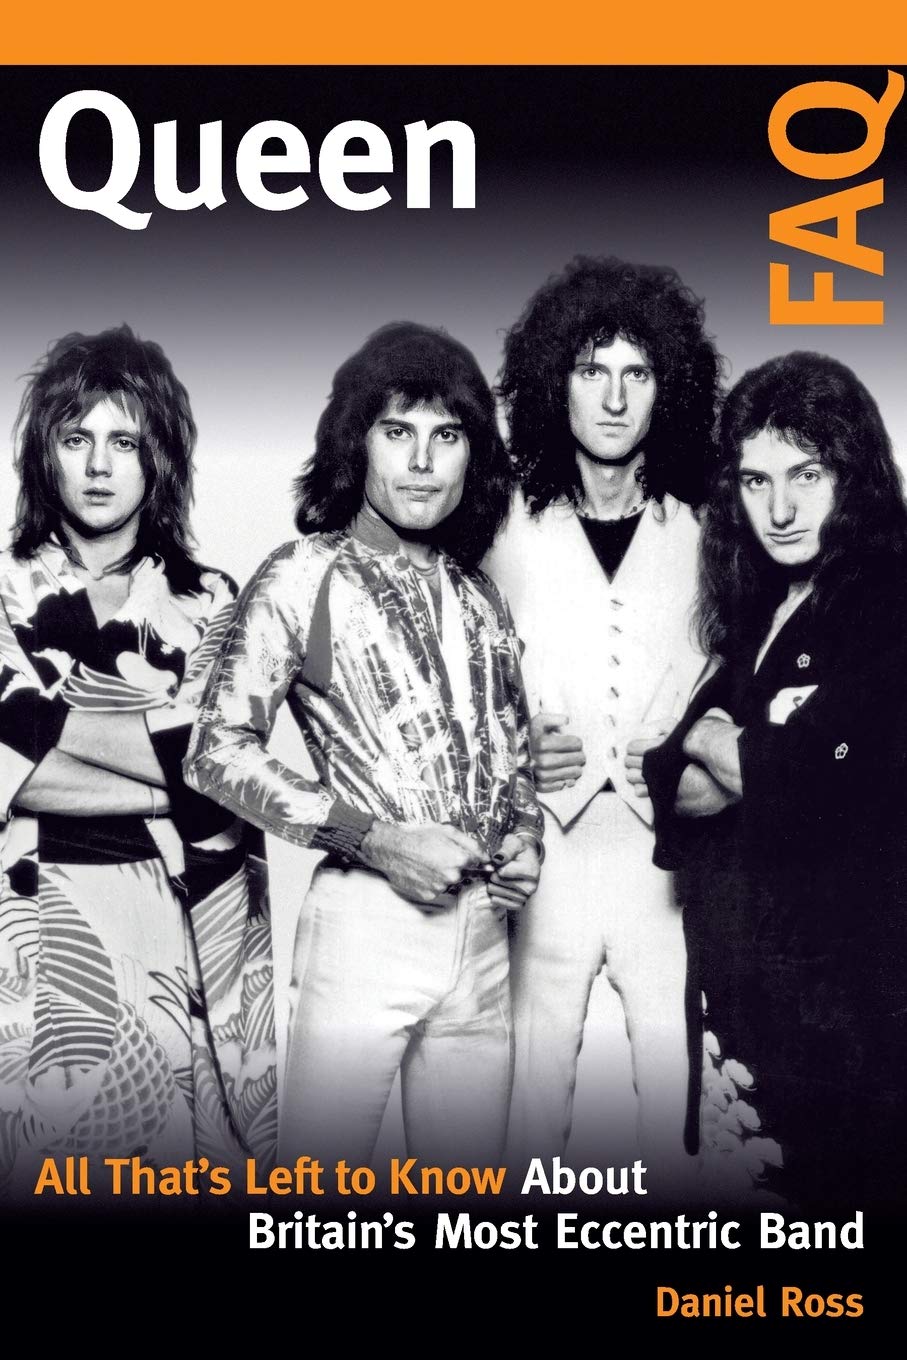 Queen FAQ: All That's Left to Know About Britain's Most Eccentric Band